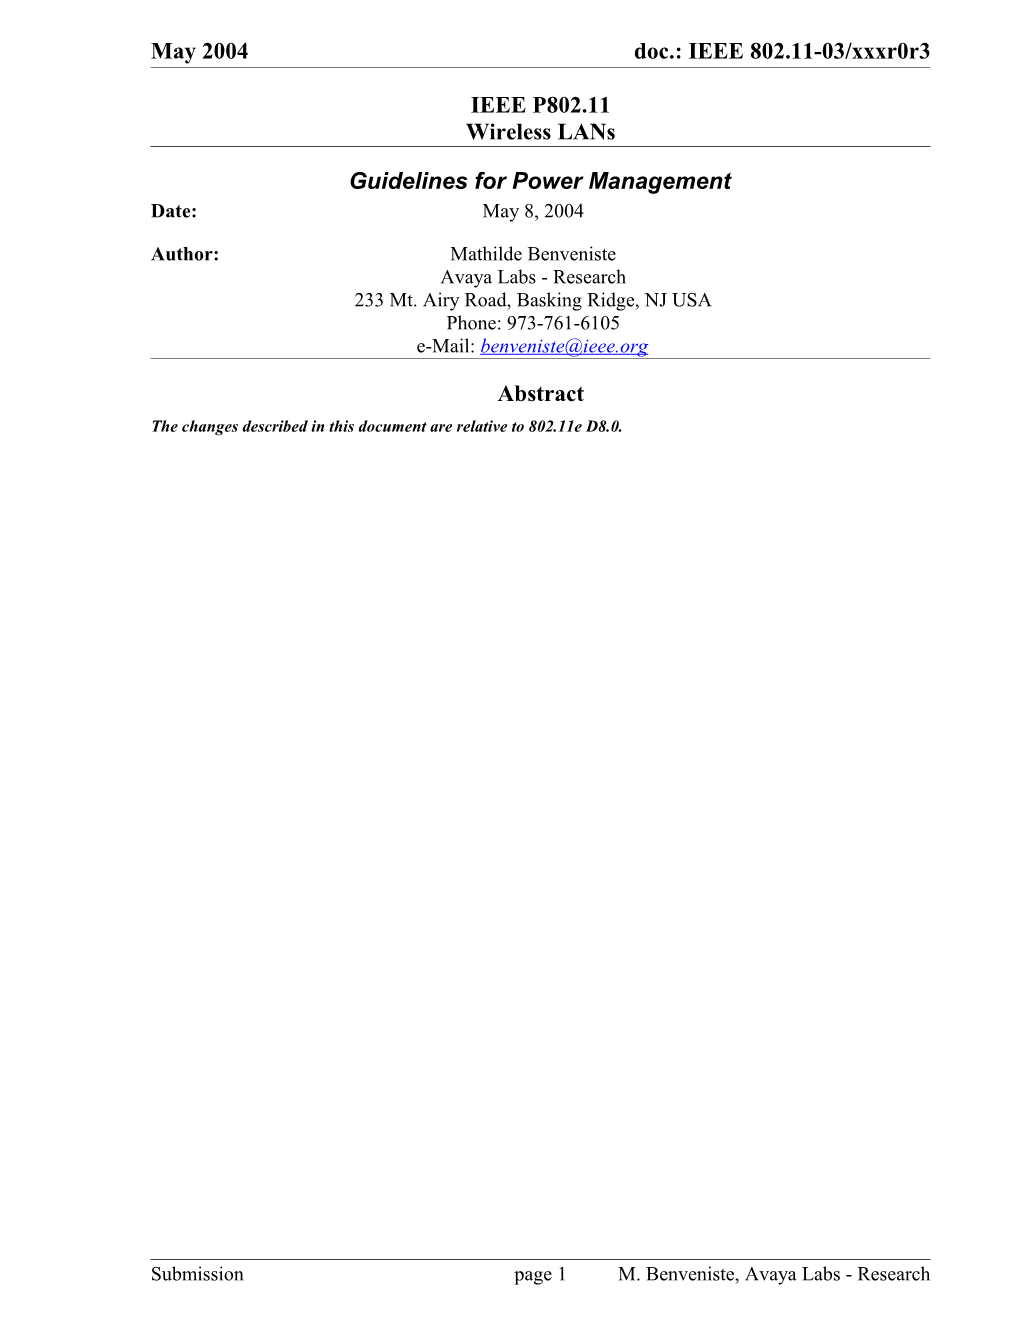 Guidelines for Power Management